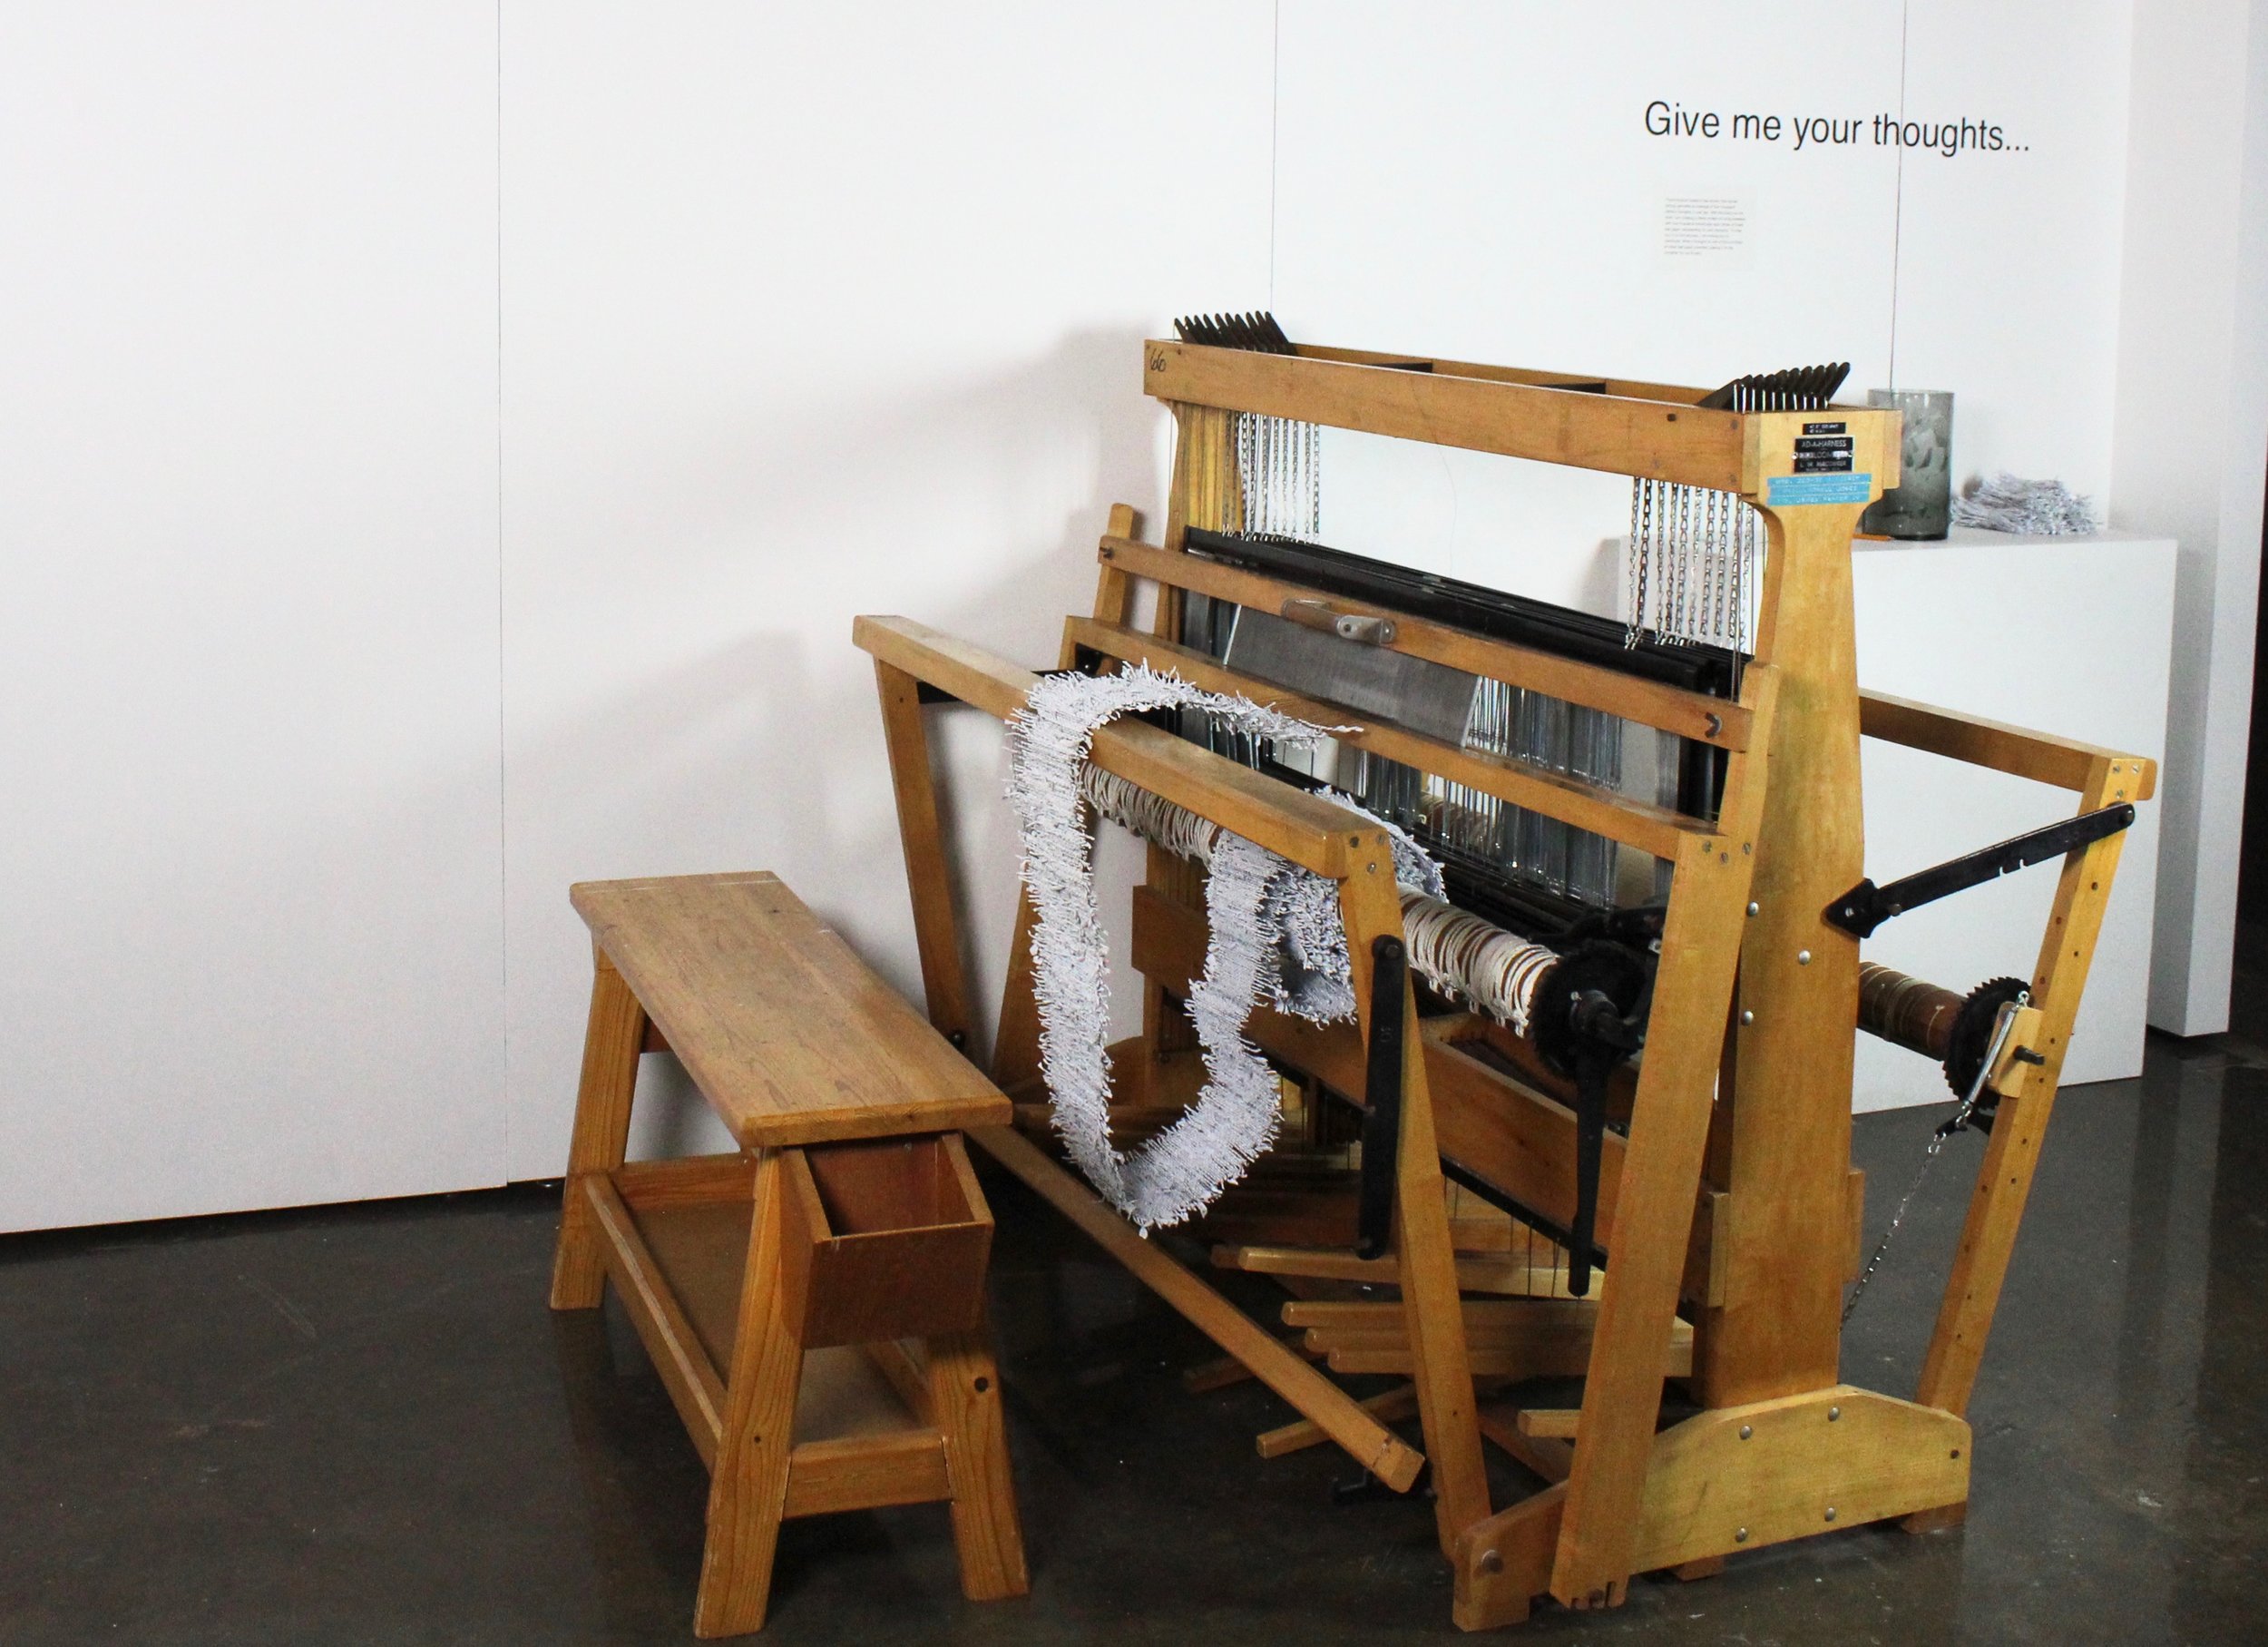  gallery view: In process on 72” floor loom with  “Give me your thoughts…”  installation. 